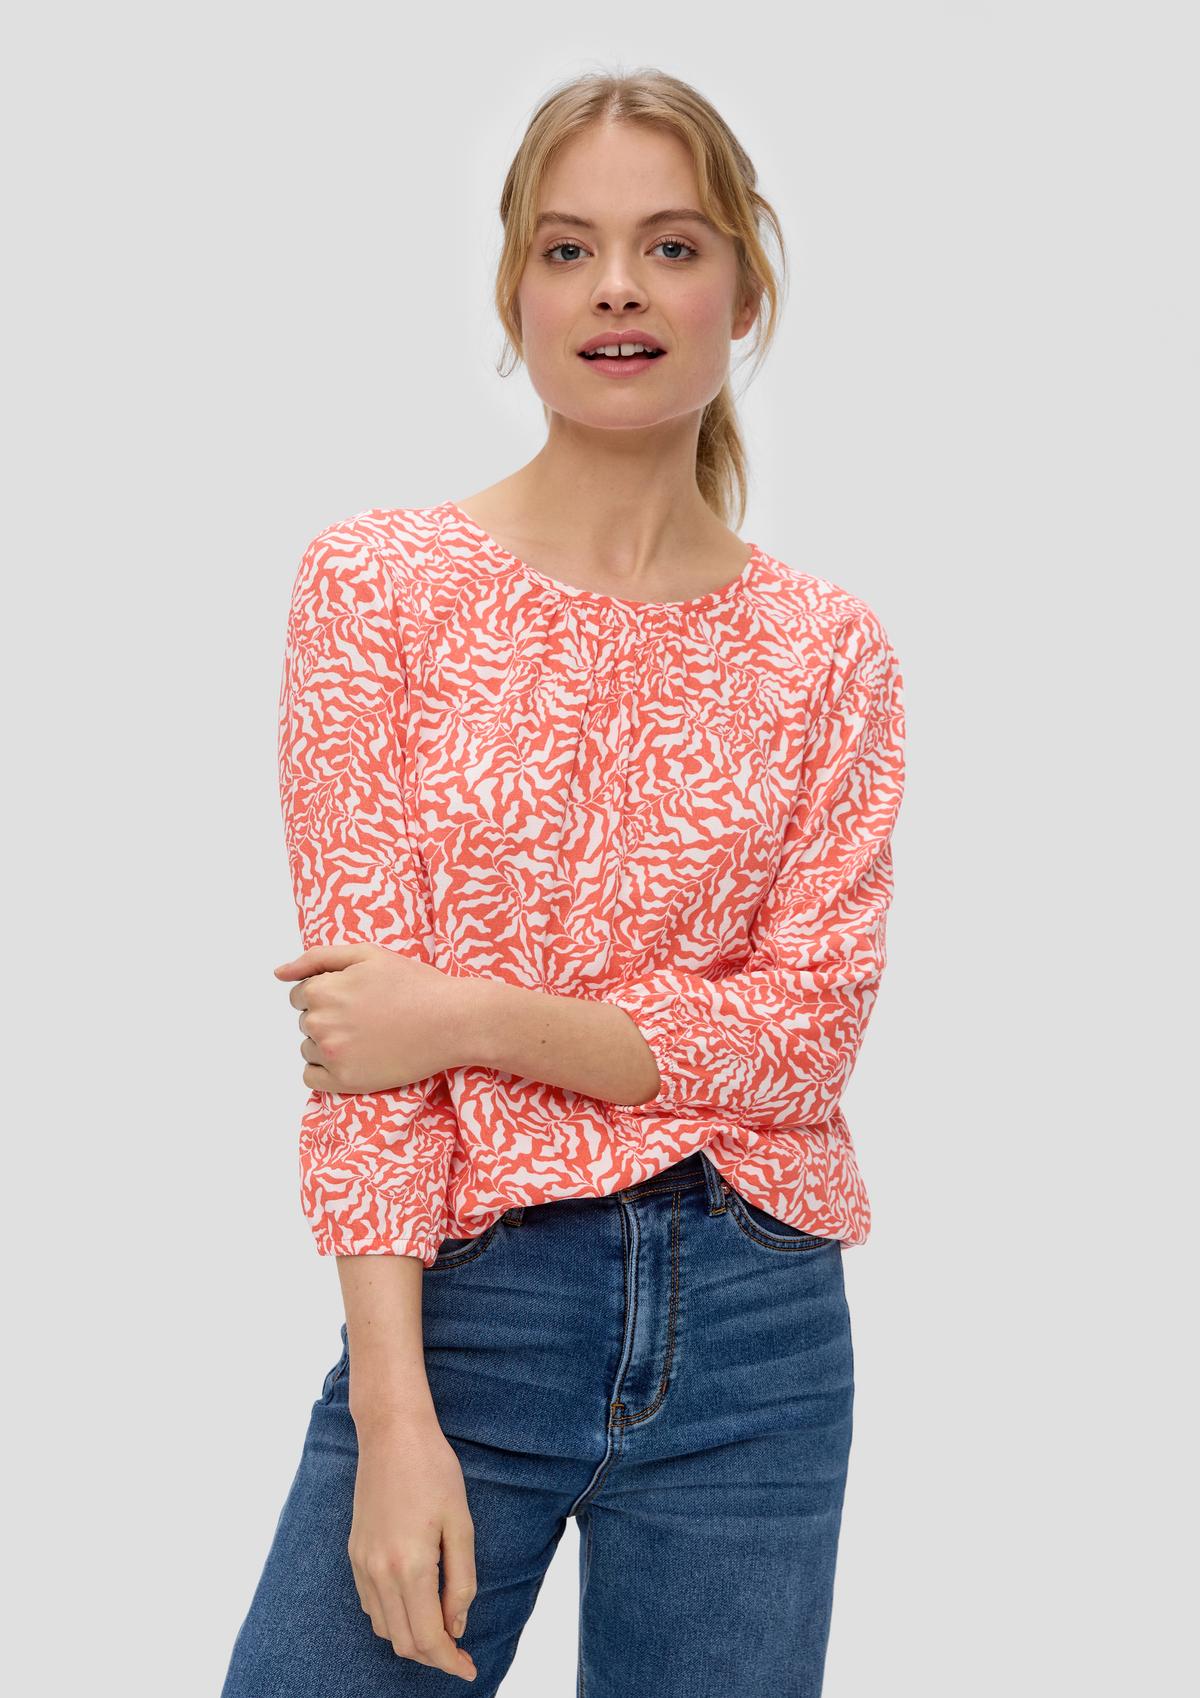 s.Oliver Jacquard blouse made of pure viscose